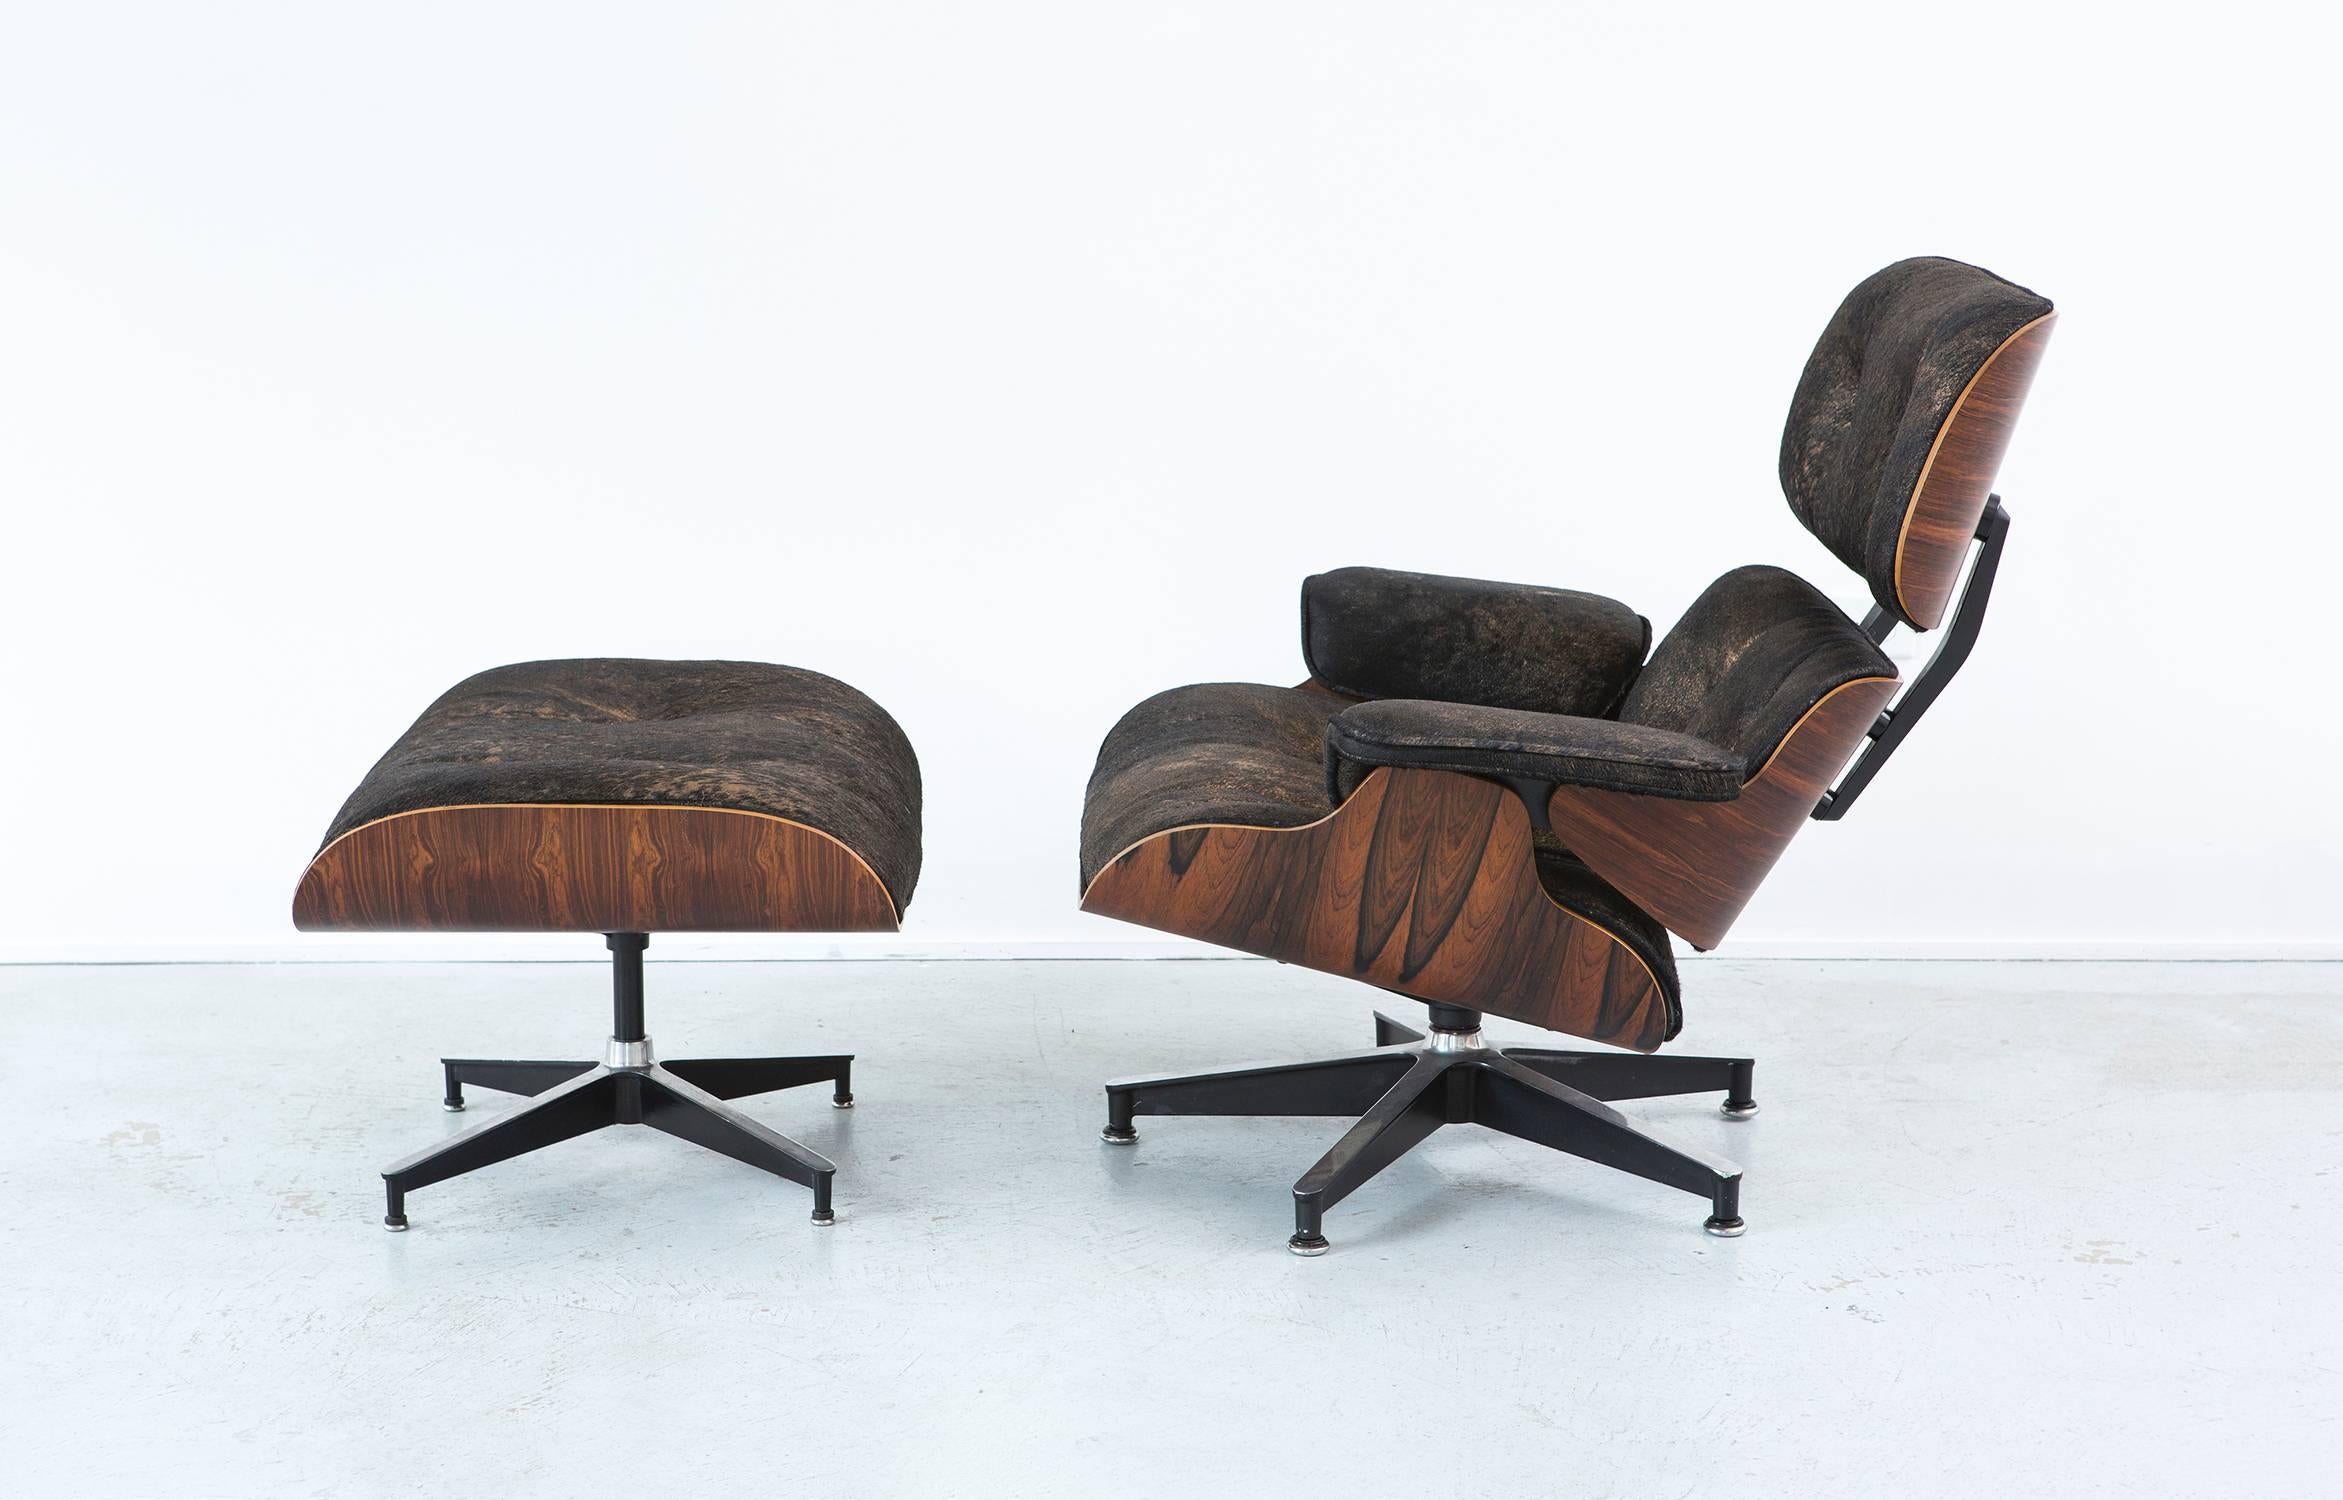 Eames 670 lounge chair and 671 ottoman. 

Designed by Charles and Ray Eames for Herman Miller, 

USA, d 1956 / circa 1978.

Reupholstered in acid washed black and gold cowhide with rosewood shell refinished.

Measures: 33